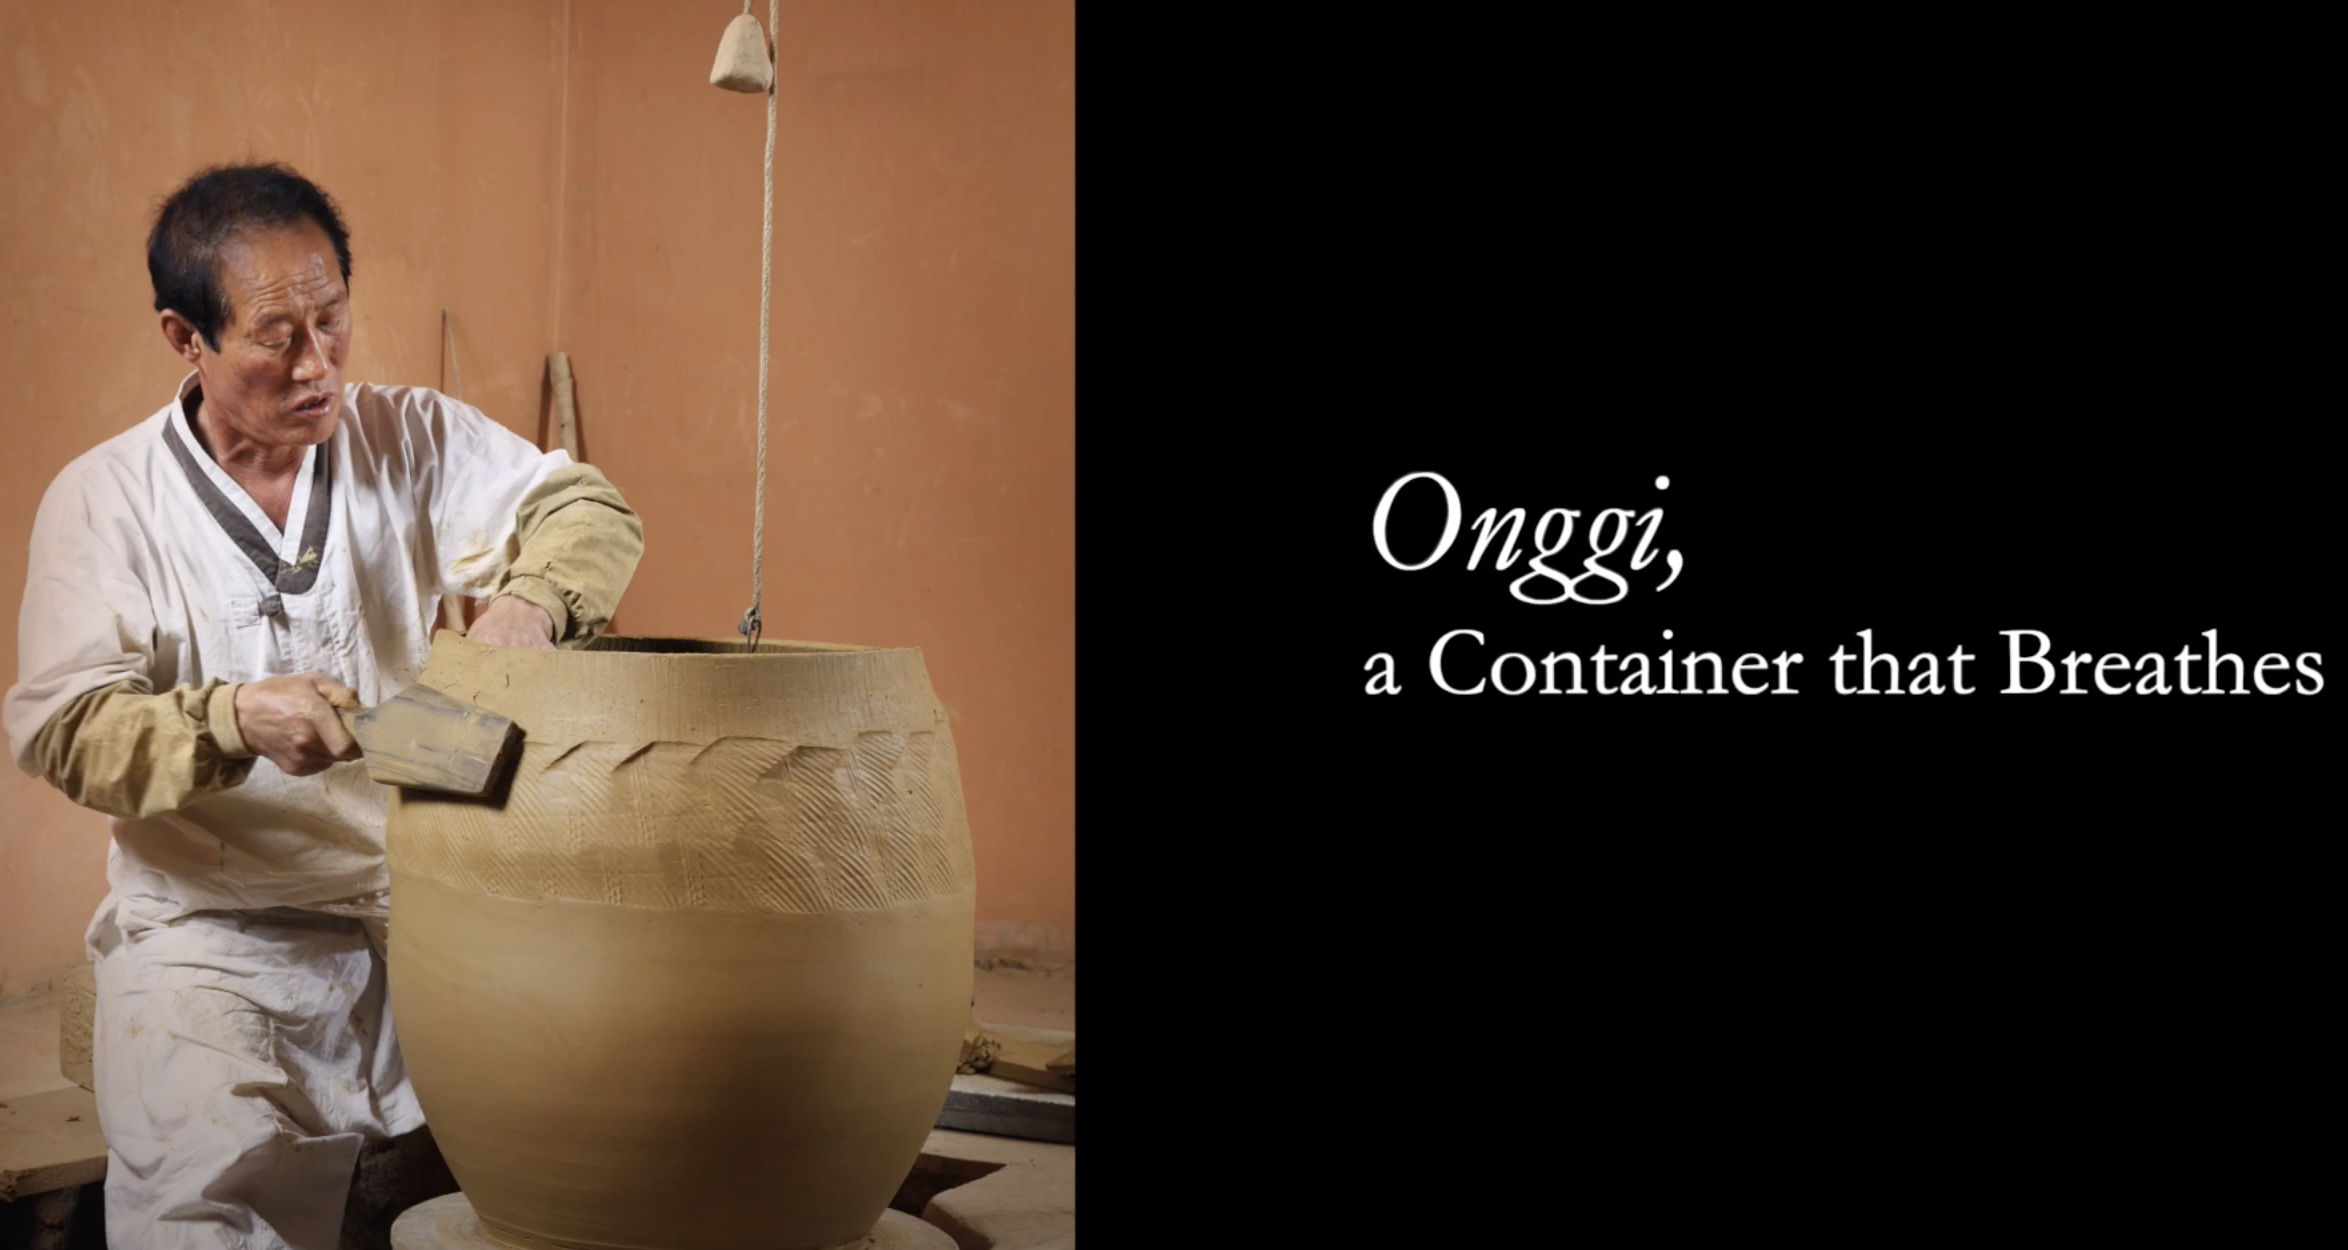 Onggi a Container that Breathes (옹기, 숨결 저장소) image